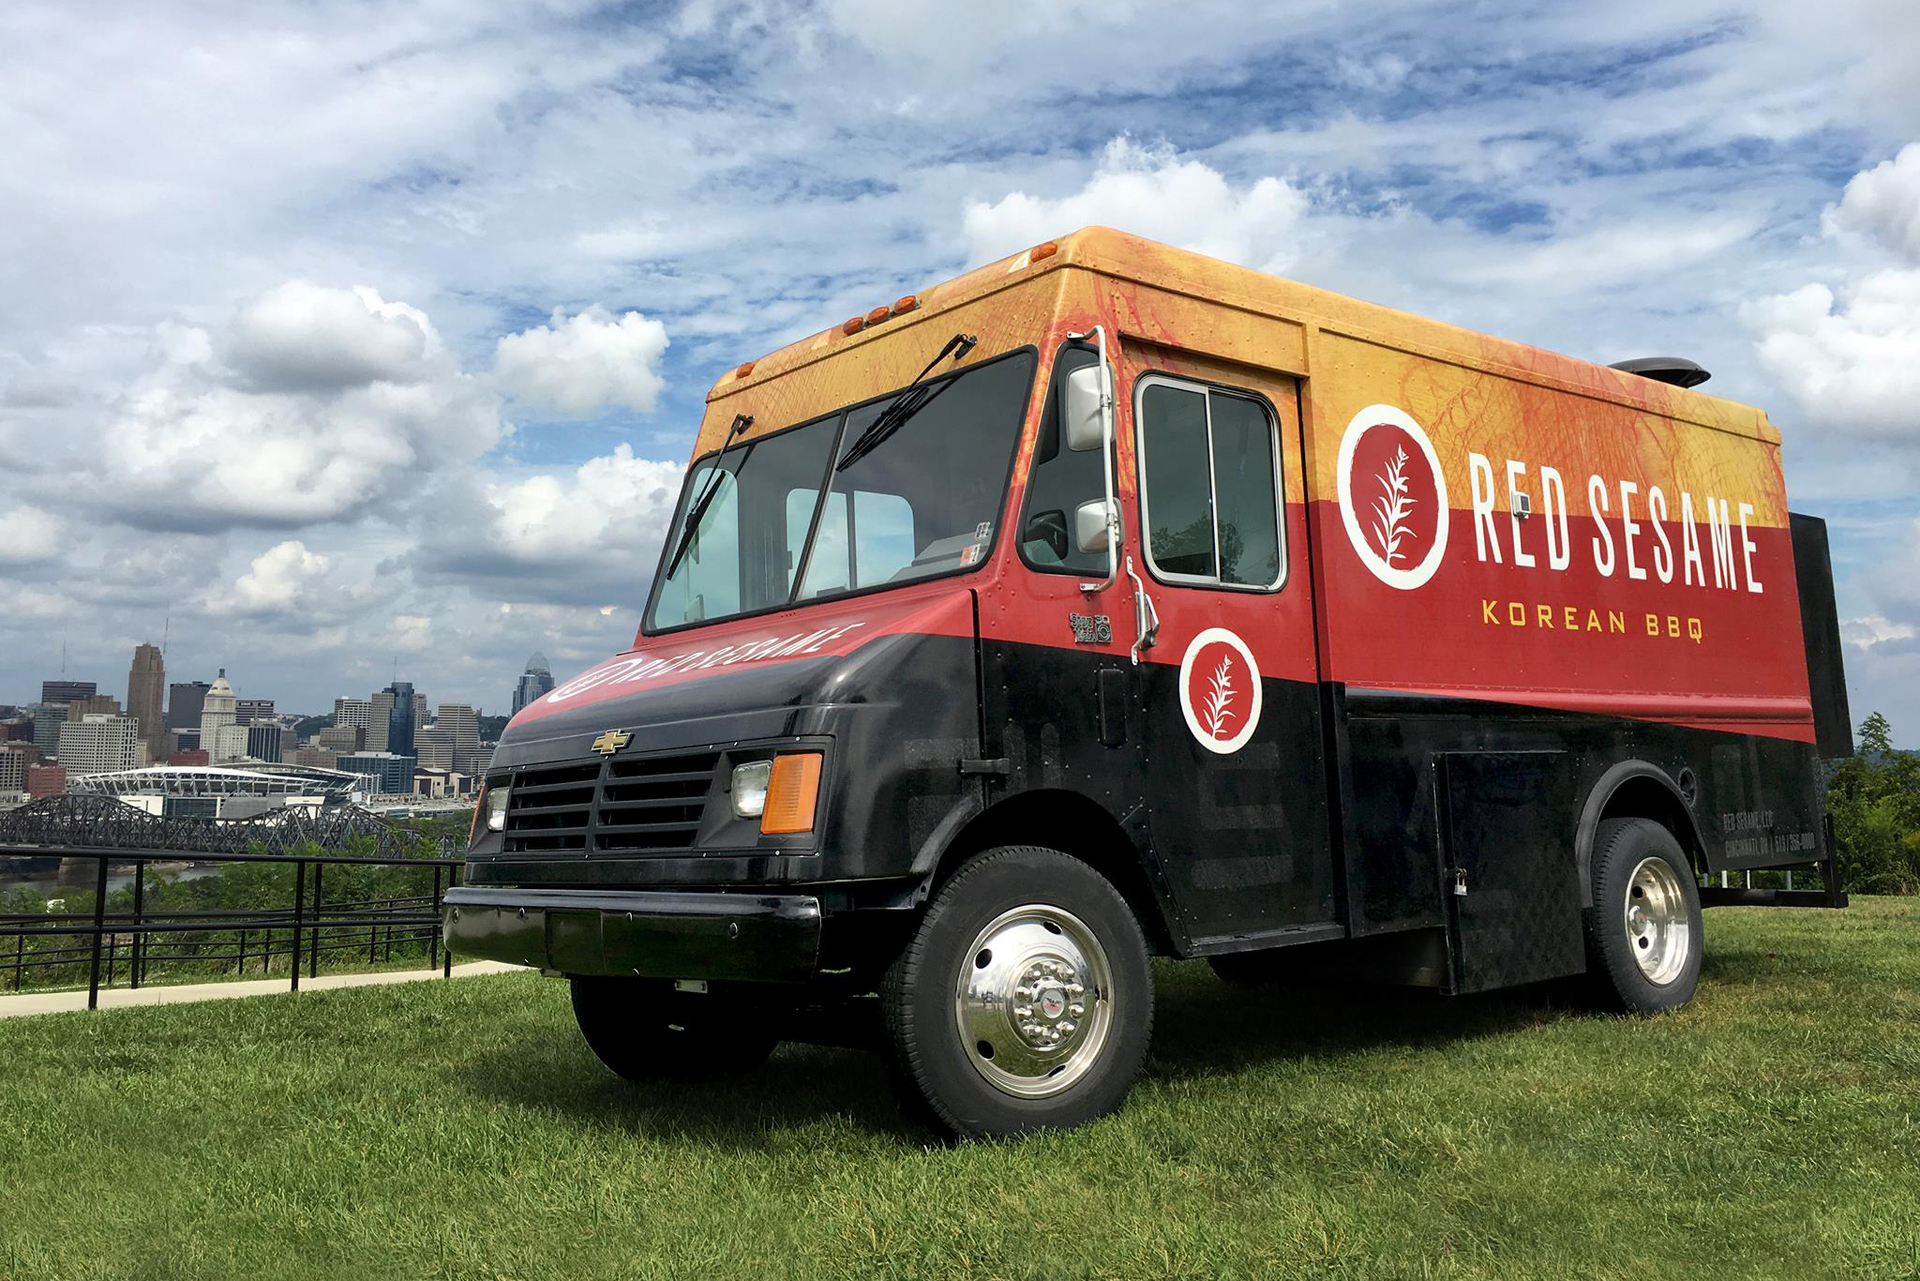 Cincinnati's Red Sesame Food Truck Now Available For Delivery on DoorDash &  Grubhub